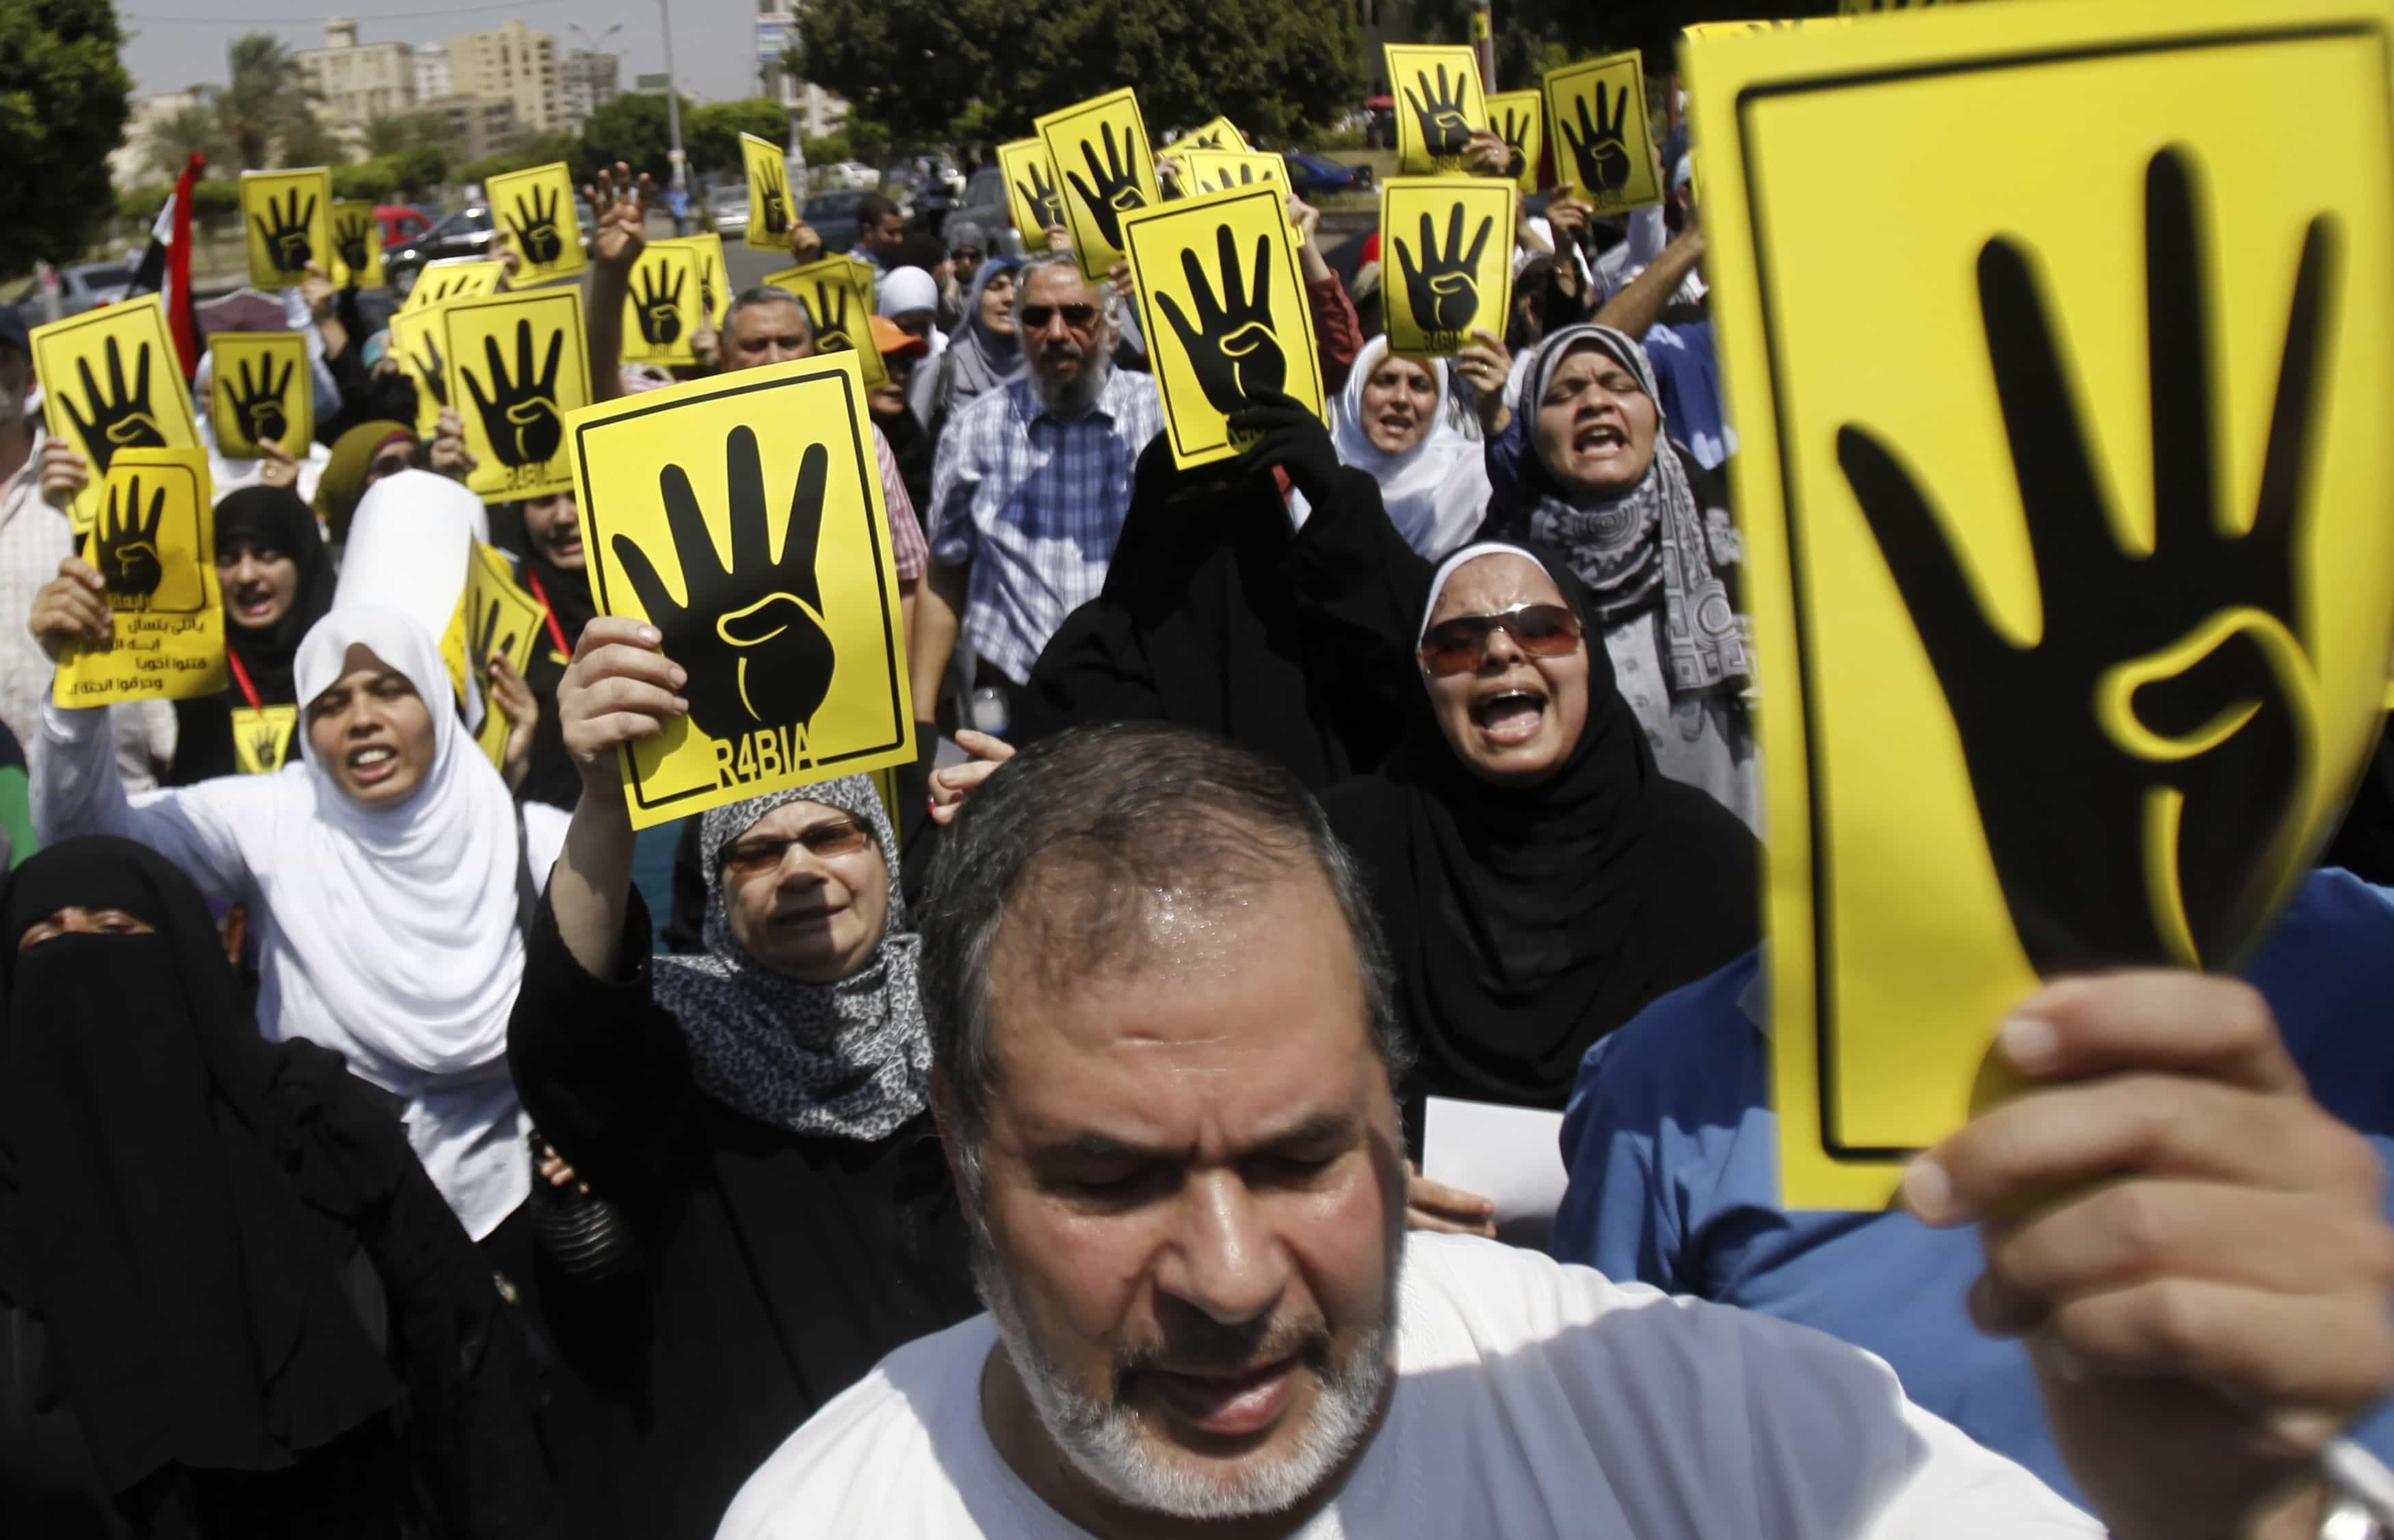 The four-fingered-salute was first used by Egyptian masses wanting to remember the Rabaa Al-Adawiya protesters supporting ousted president Mohammed Morsi who were brutally dispersed by the military in Egypt on 14 August 2013, REUTERS/Amr Abdallah Dalsh